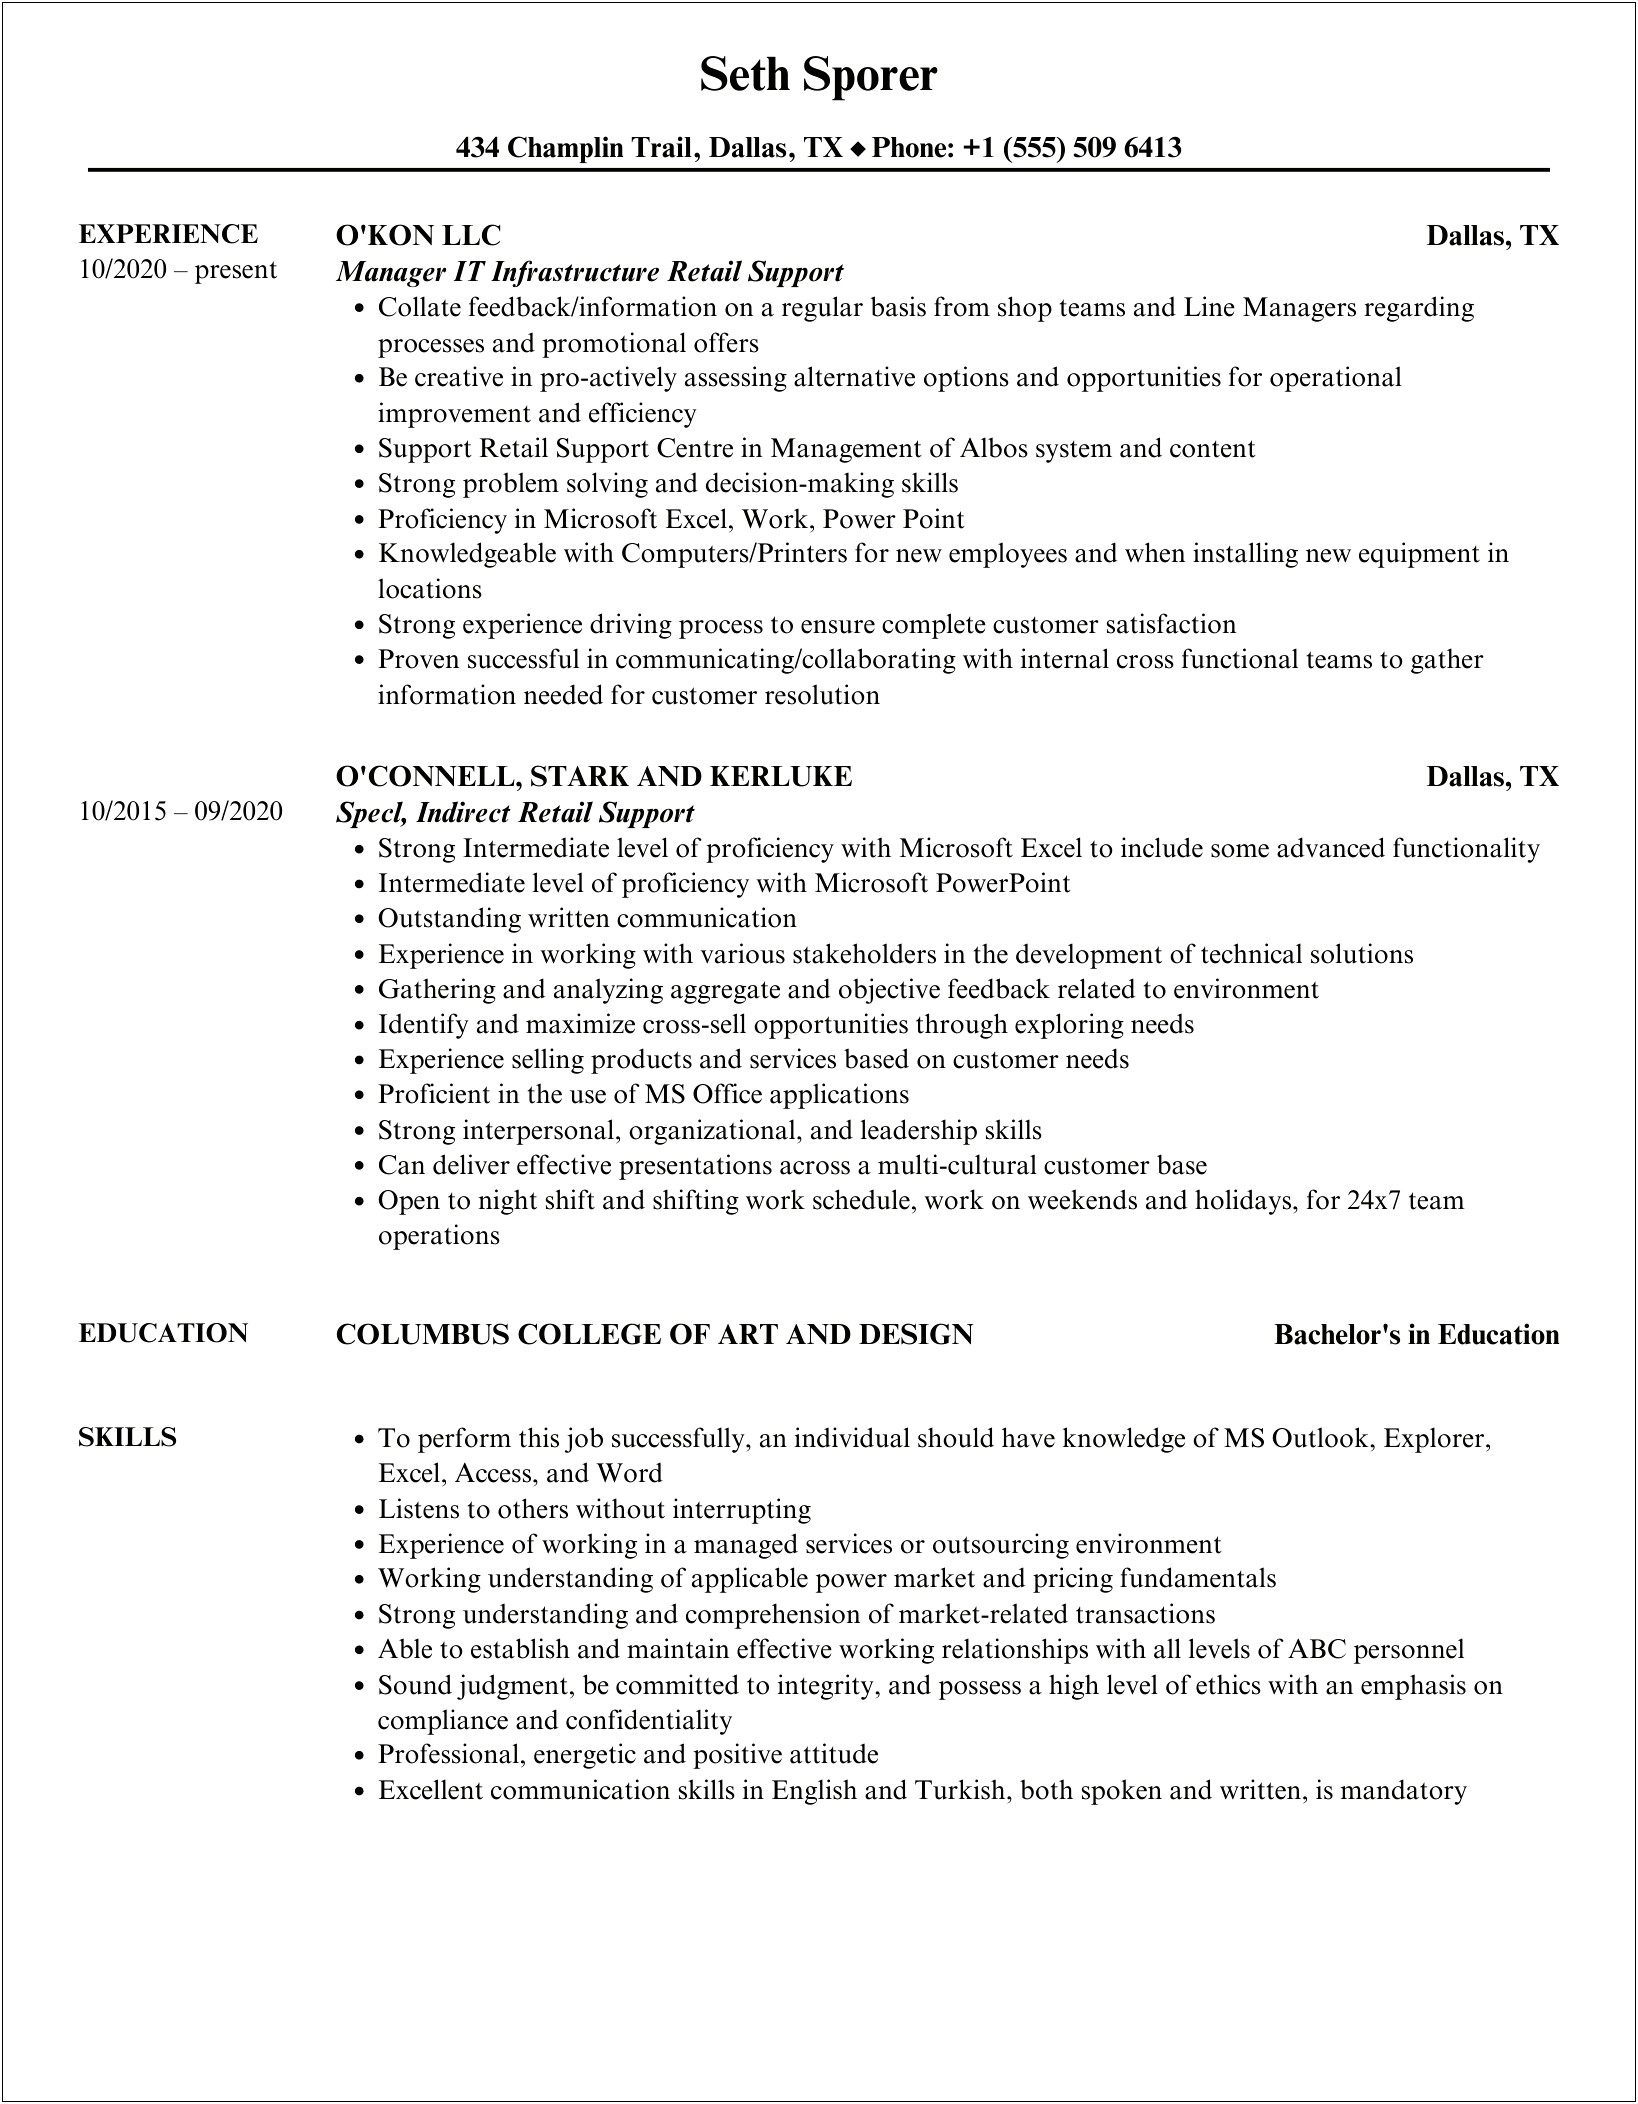 A Description Resume On Pacesettler For Retail Specialist